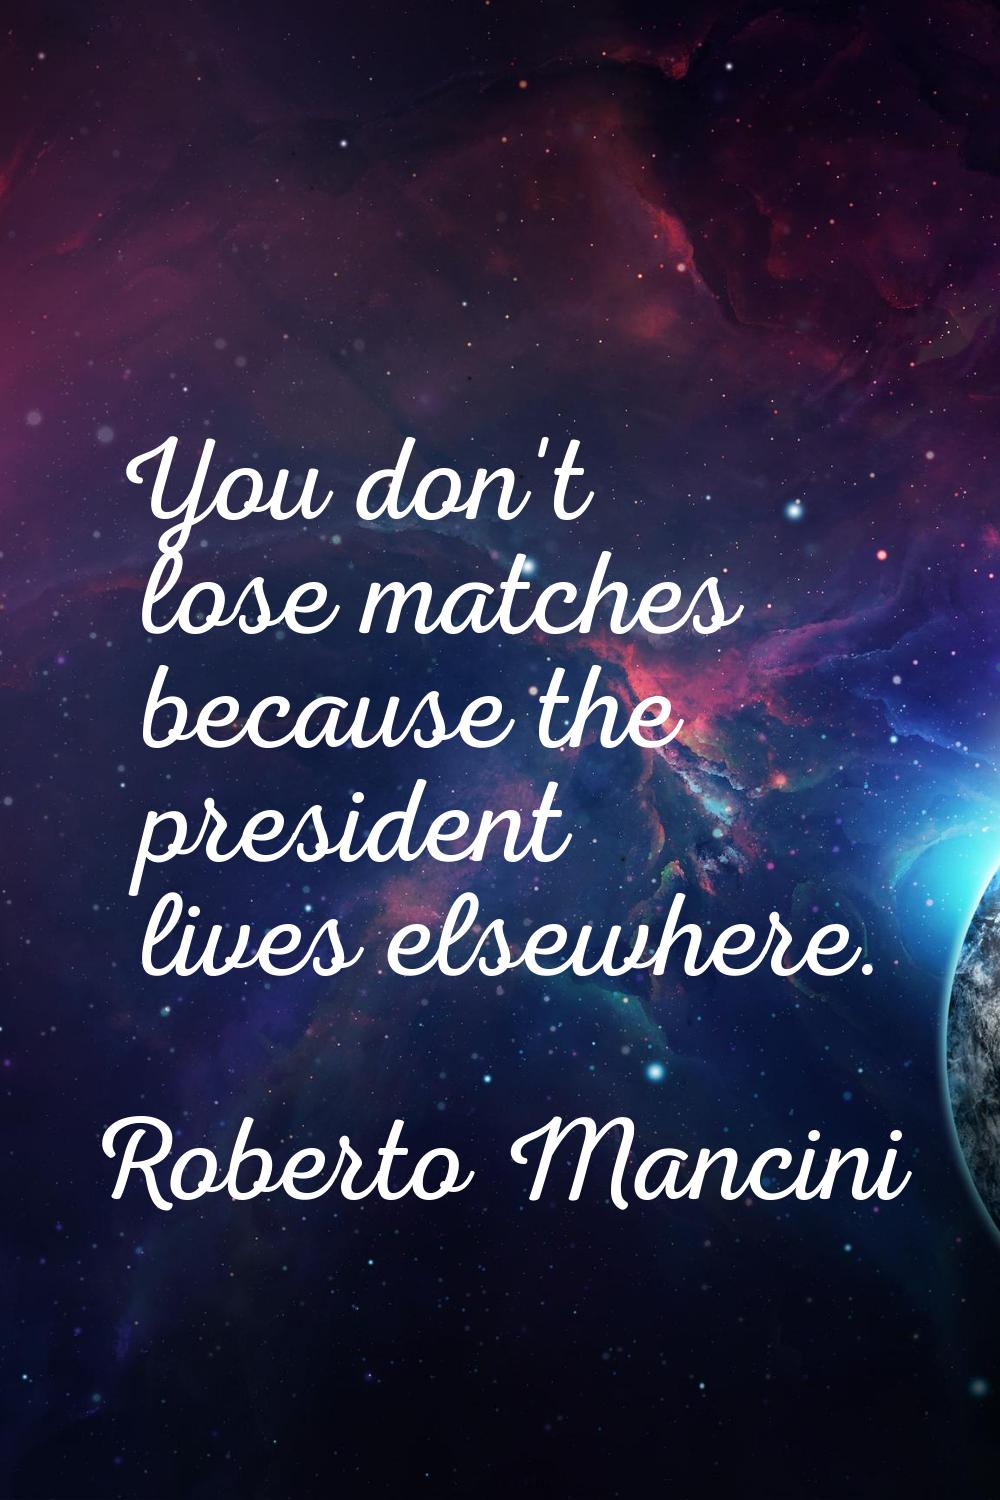 You don't lose matches because the president lives elsewhere.